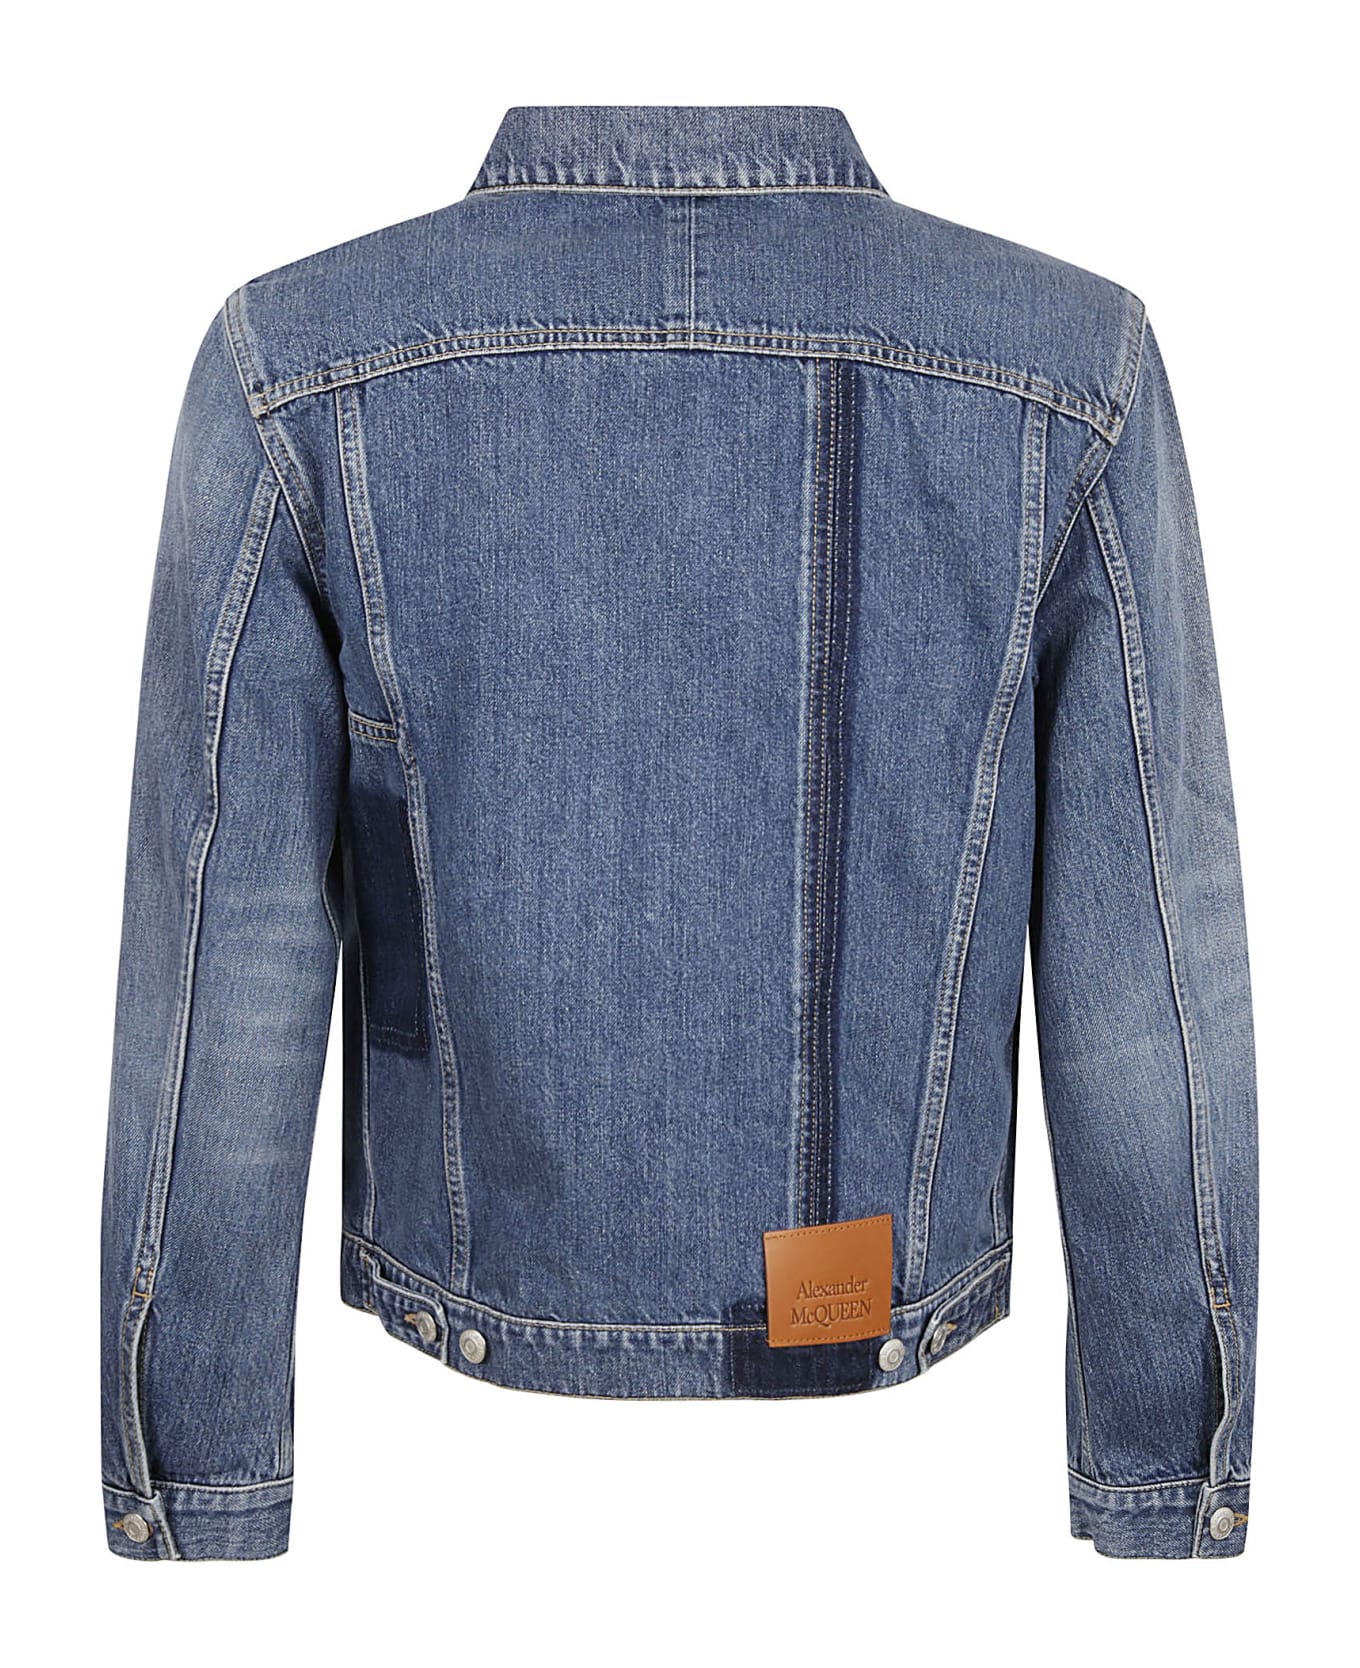 Alexander McQueen Reconstructed Dn Jacket - Blue Washed